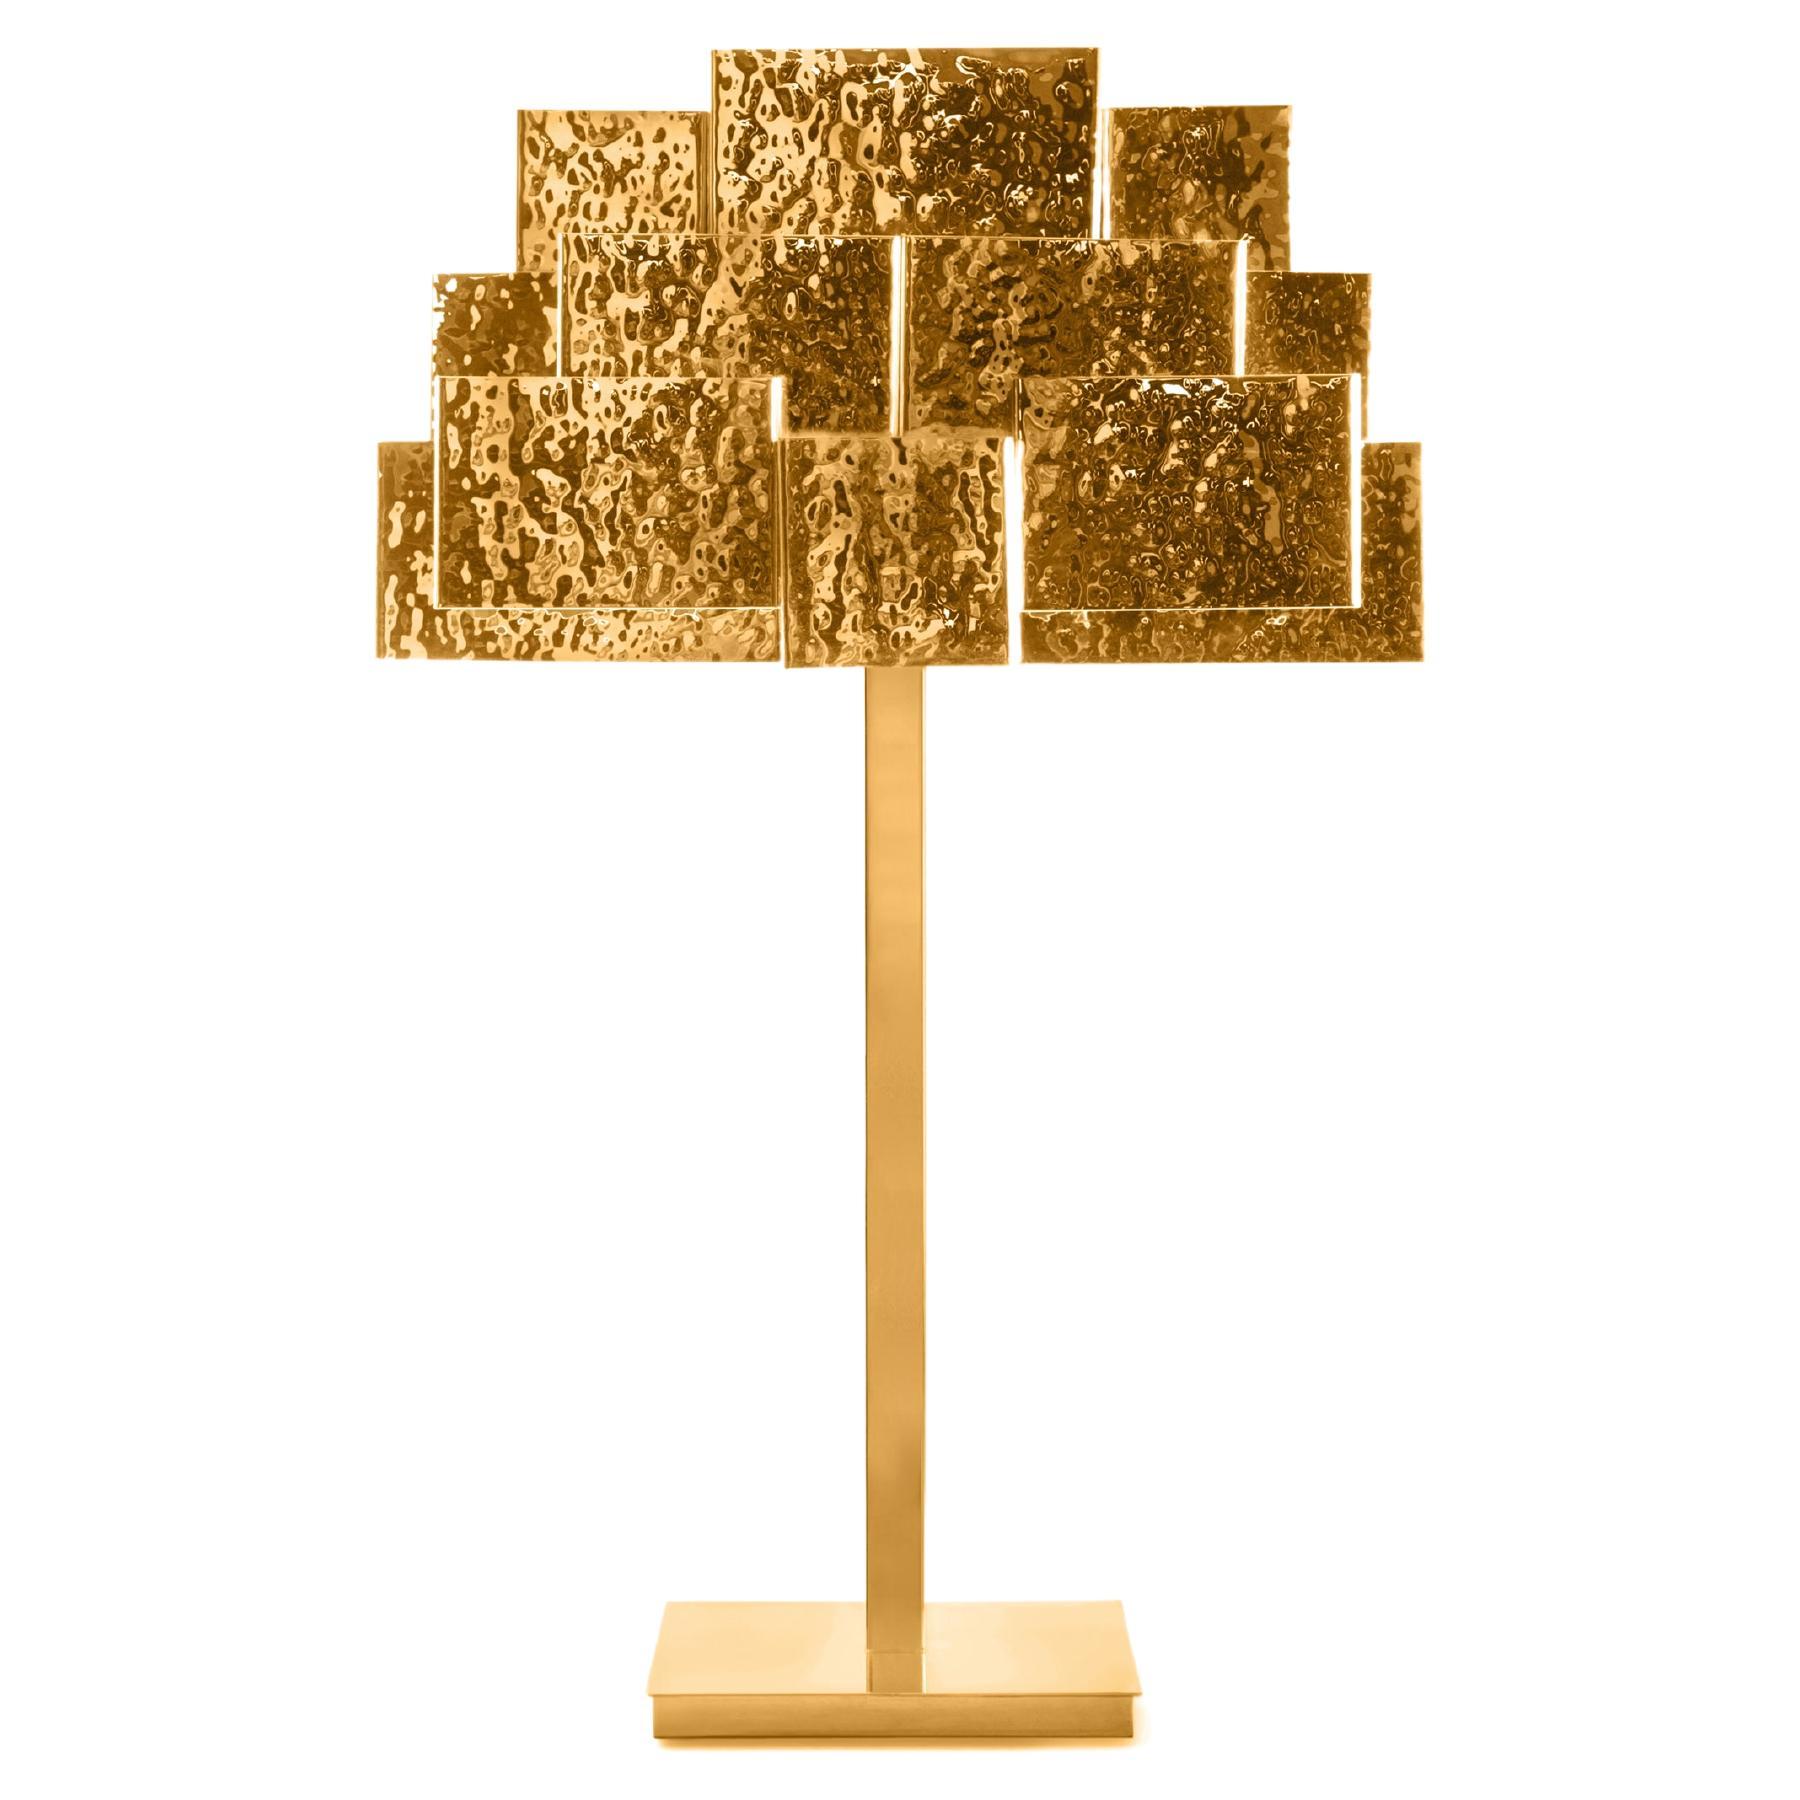 Inspiring Trees Hammered Golden Brass Table Lamp by InsidherLand